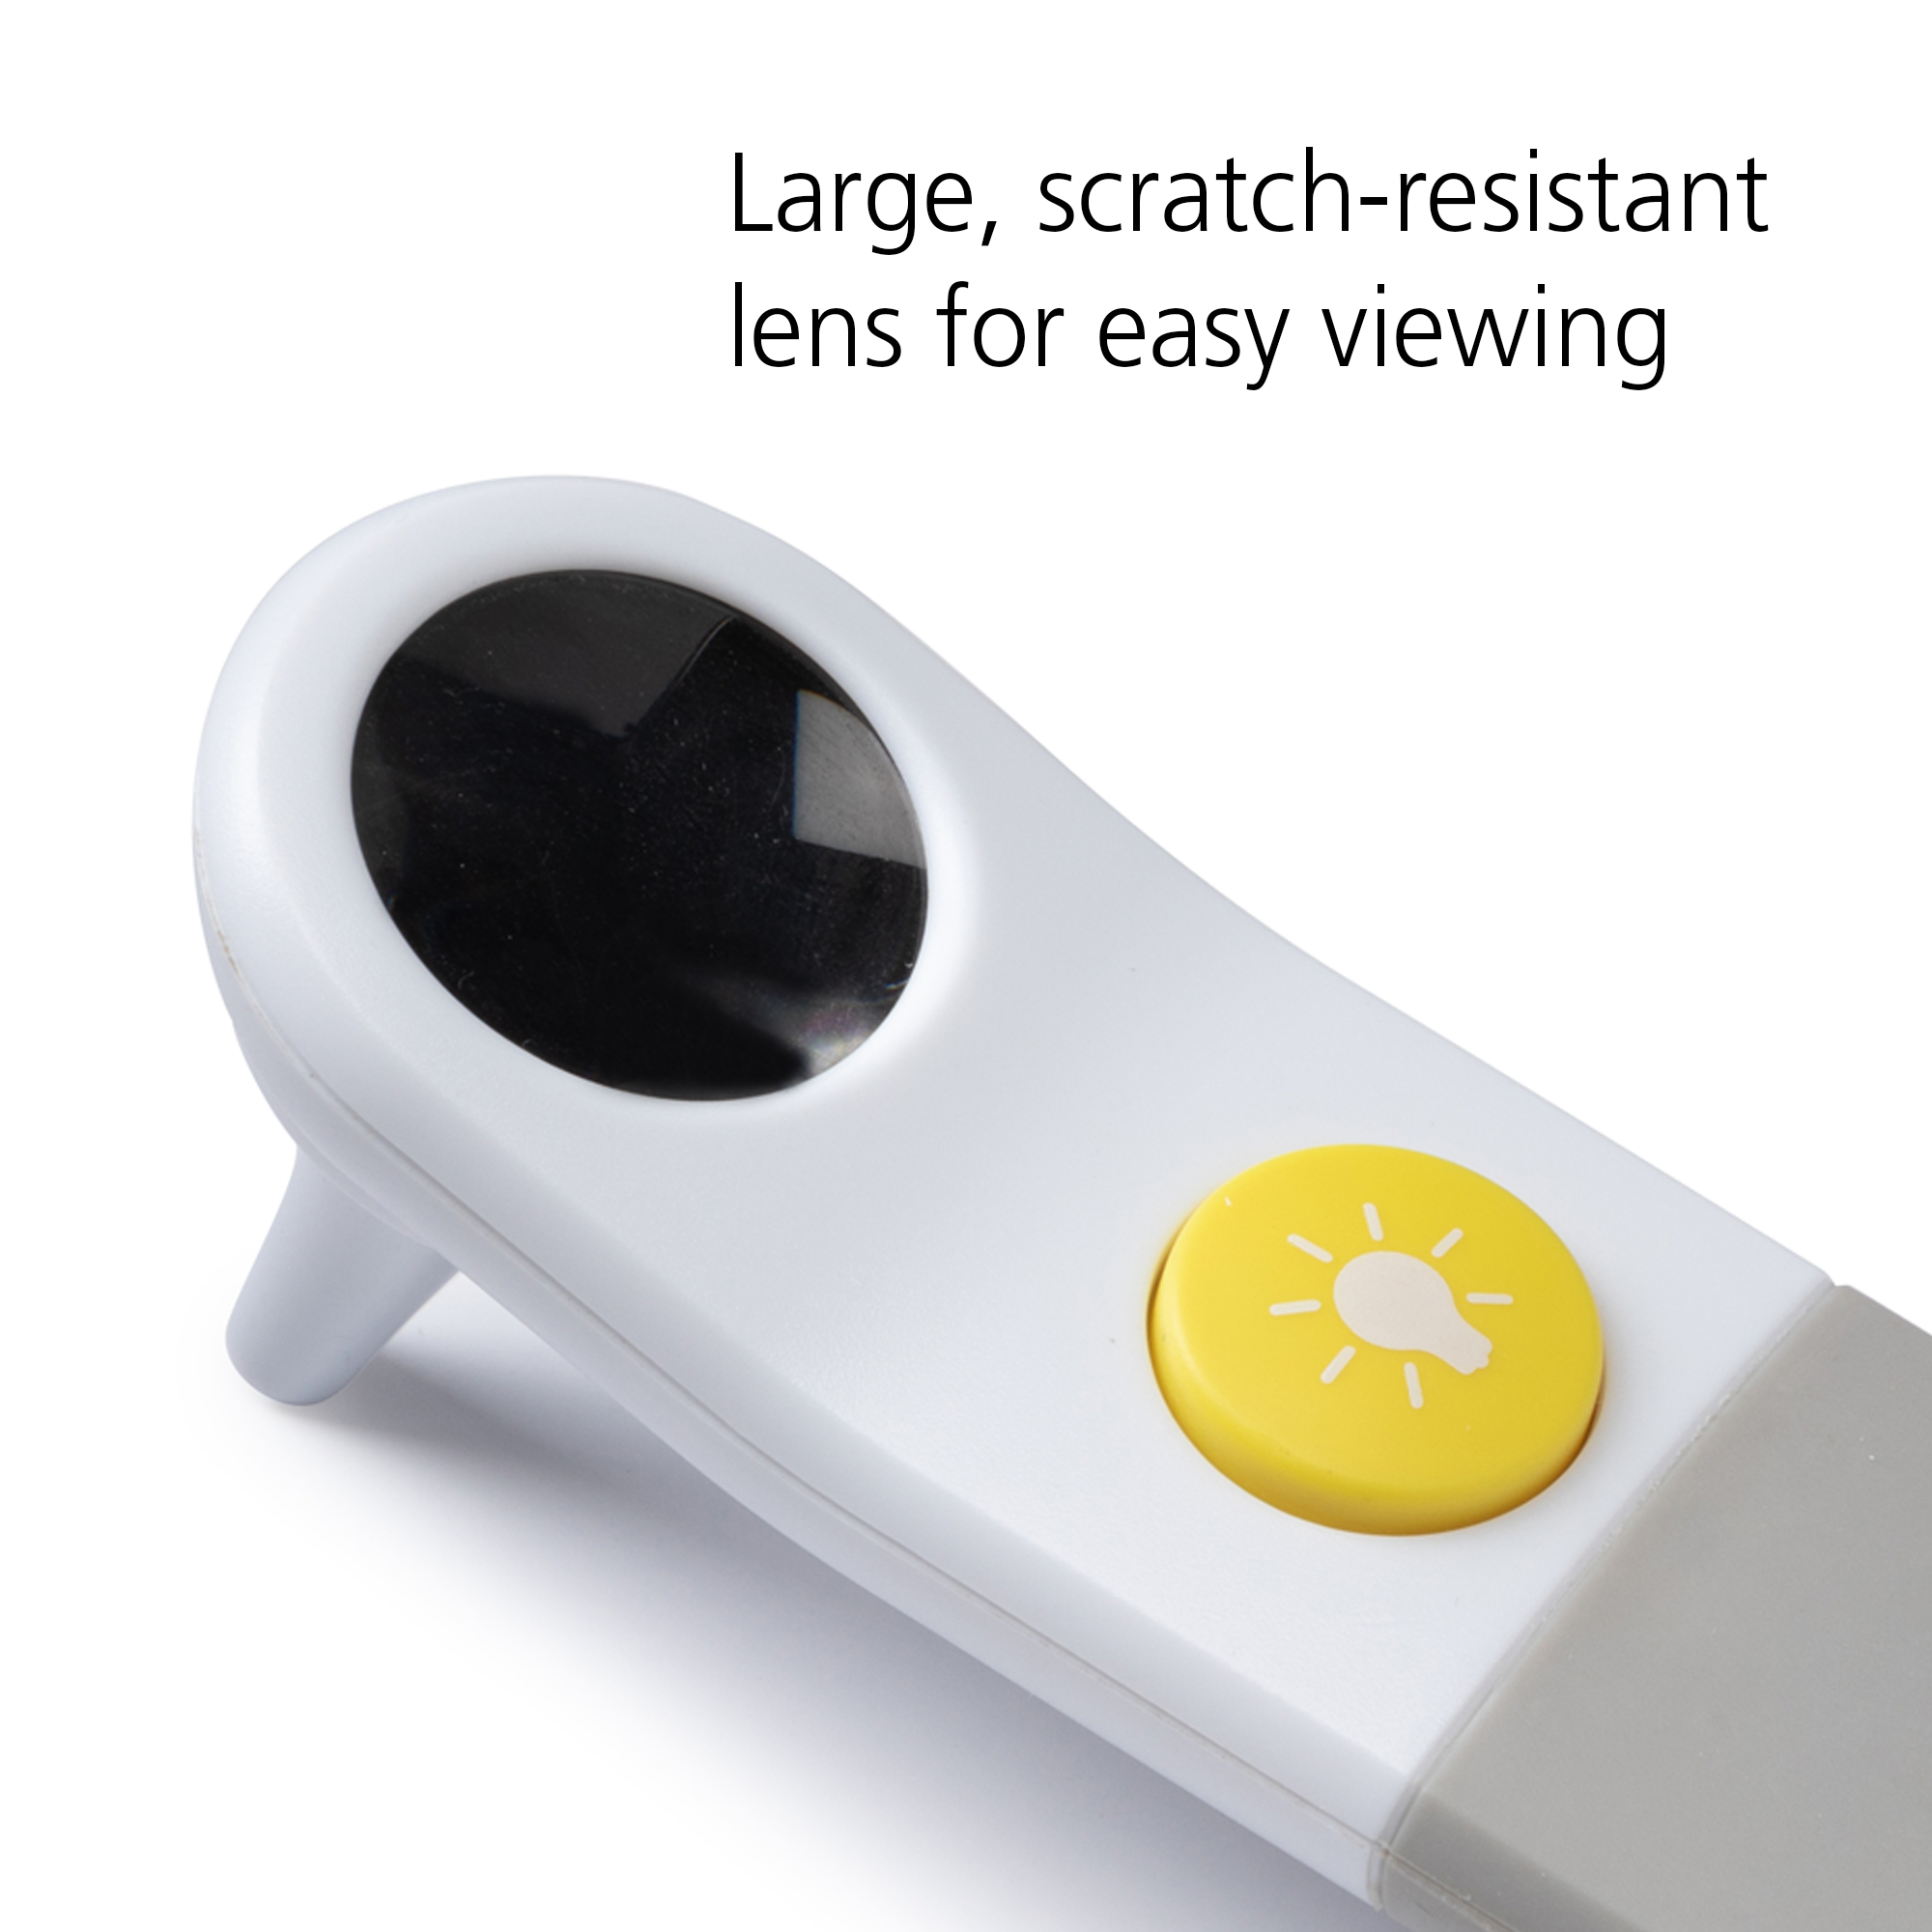 Large, scratch resistant lens for easy viewing